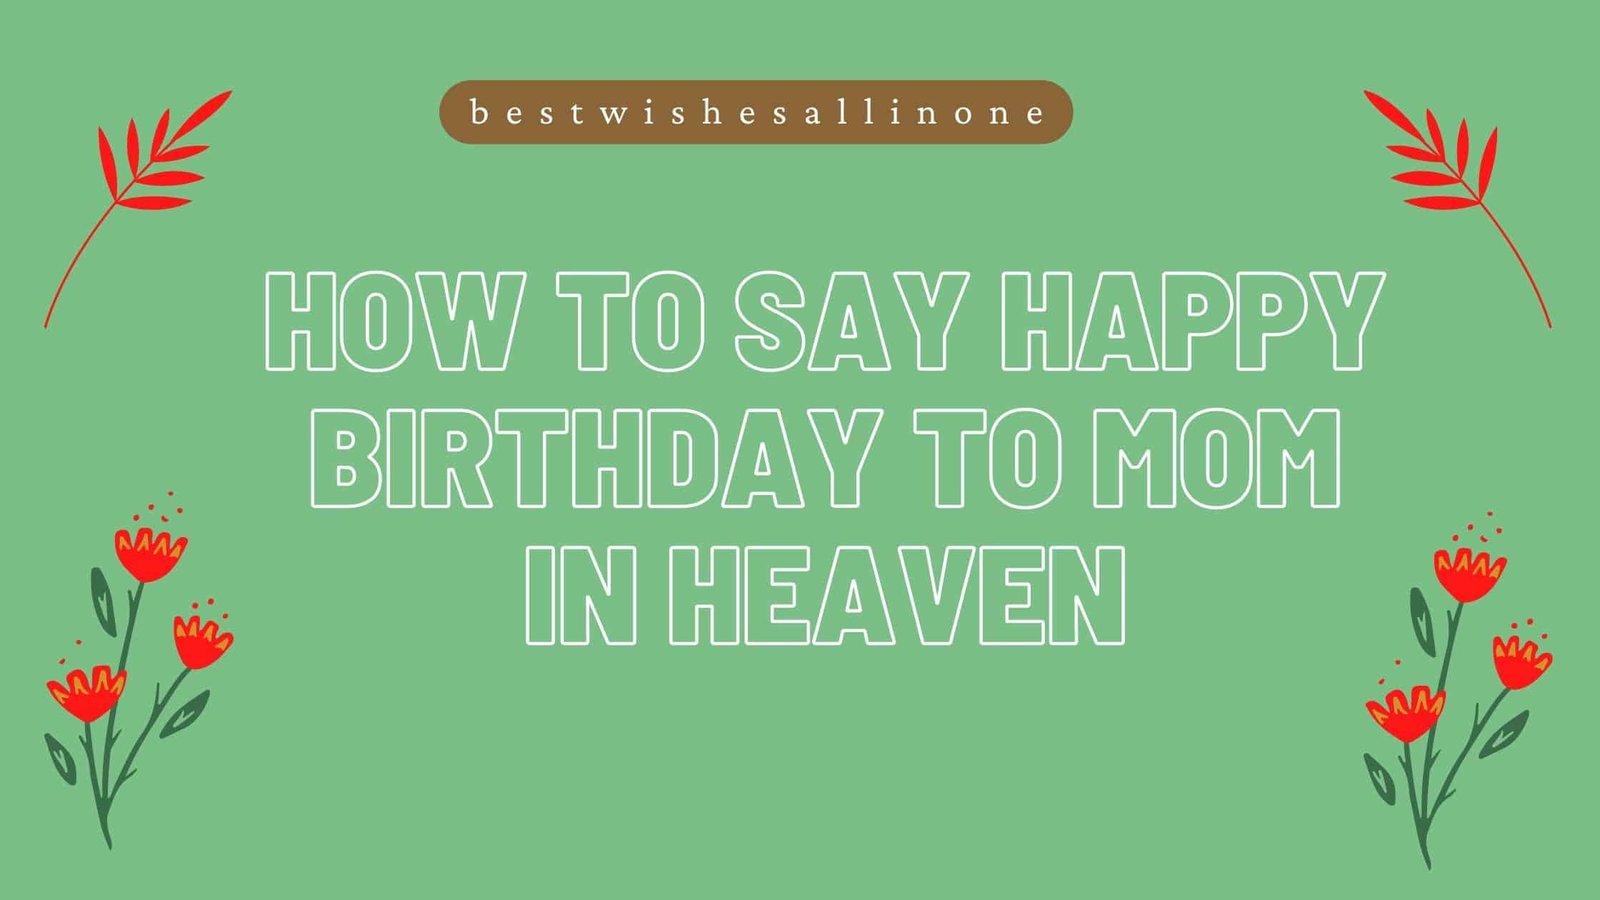 How to Say Happy Birthday to MOM in Heaven